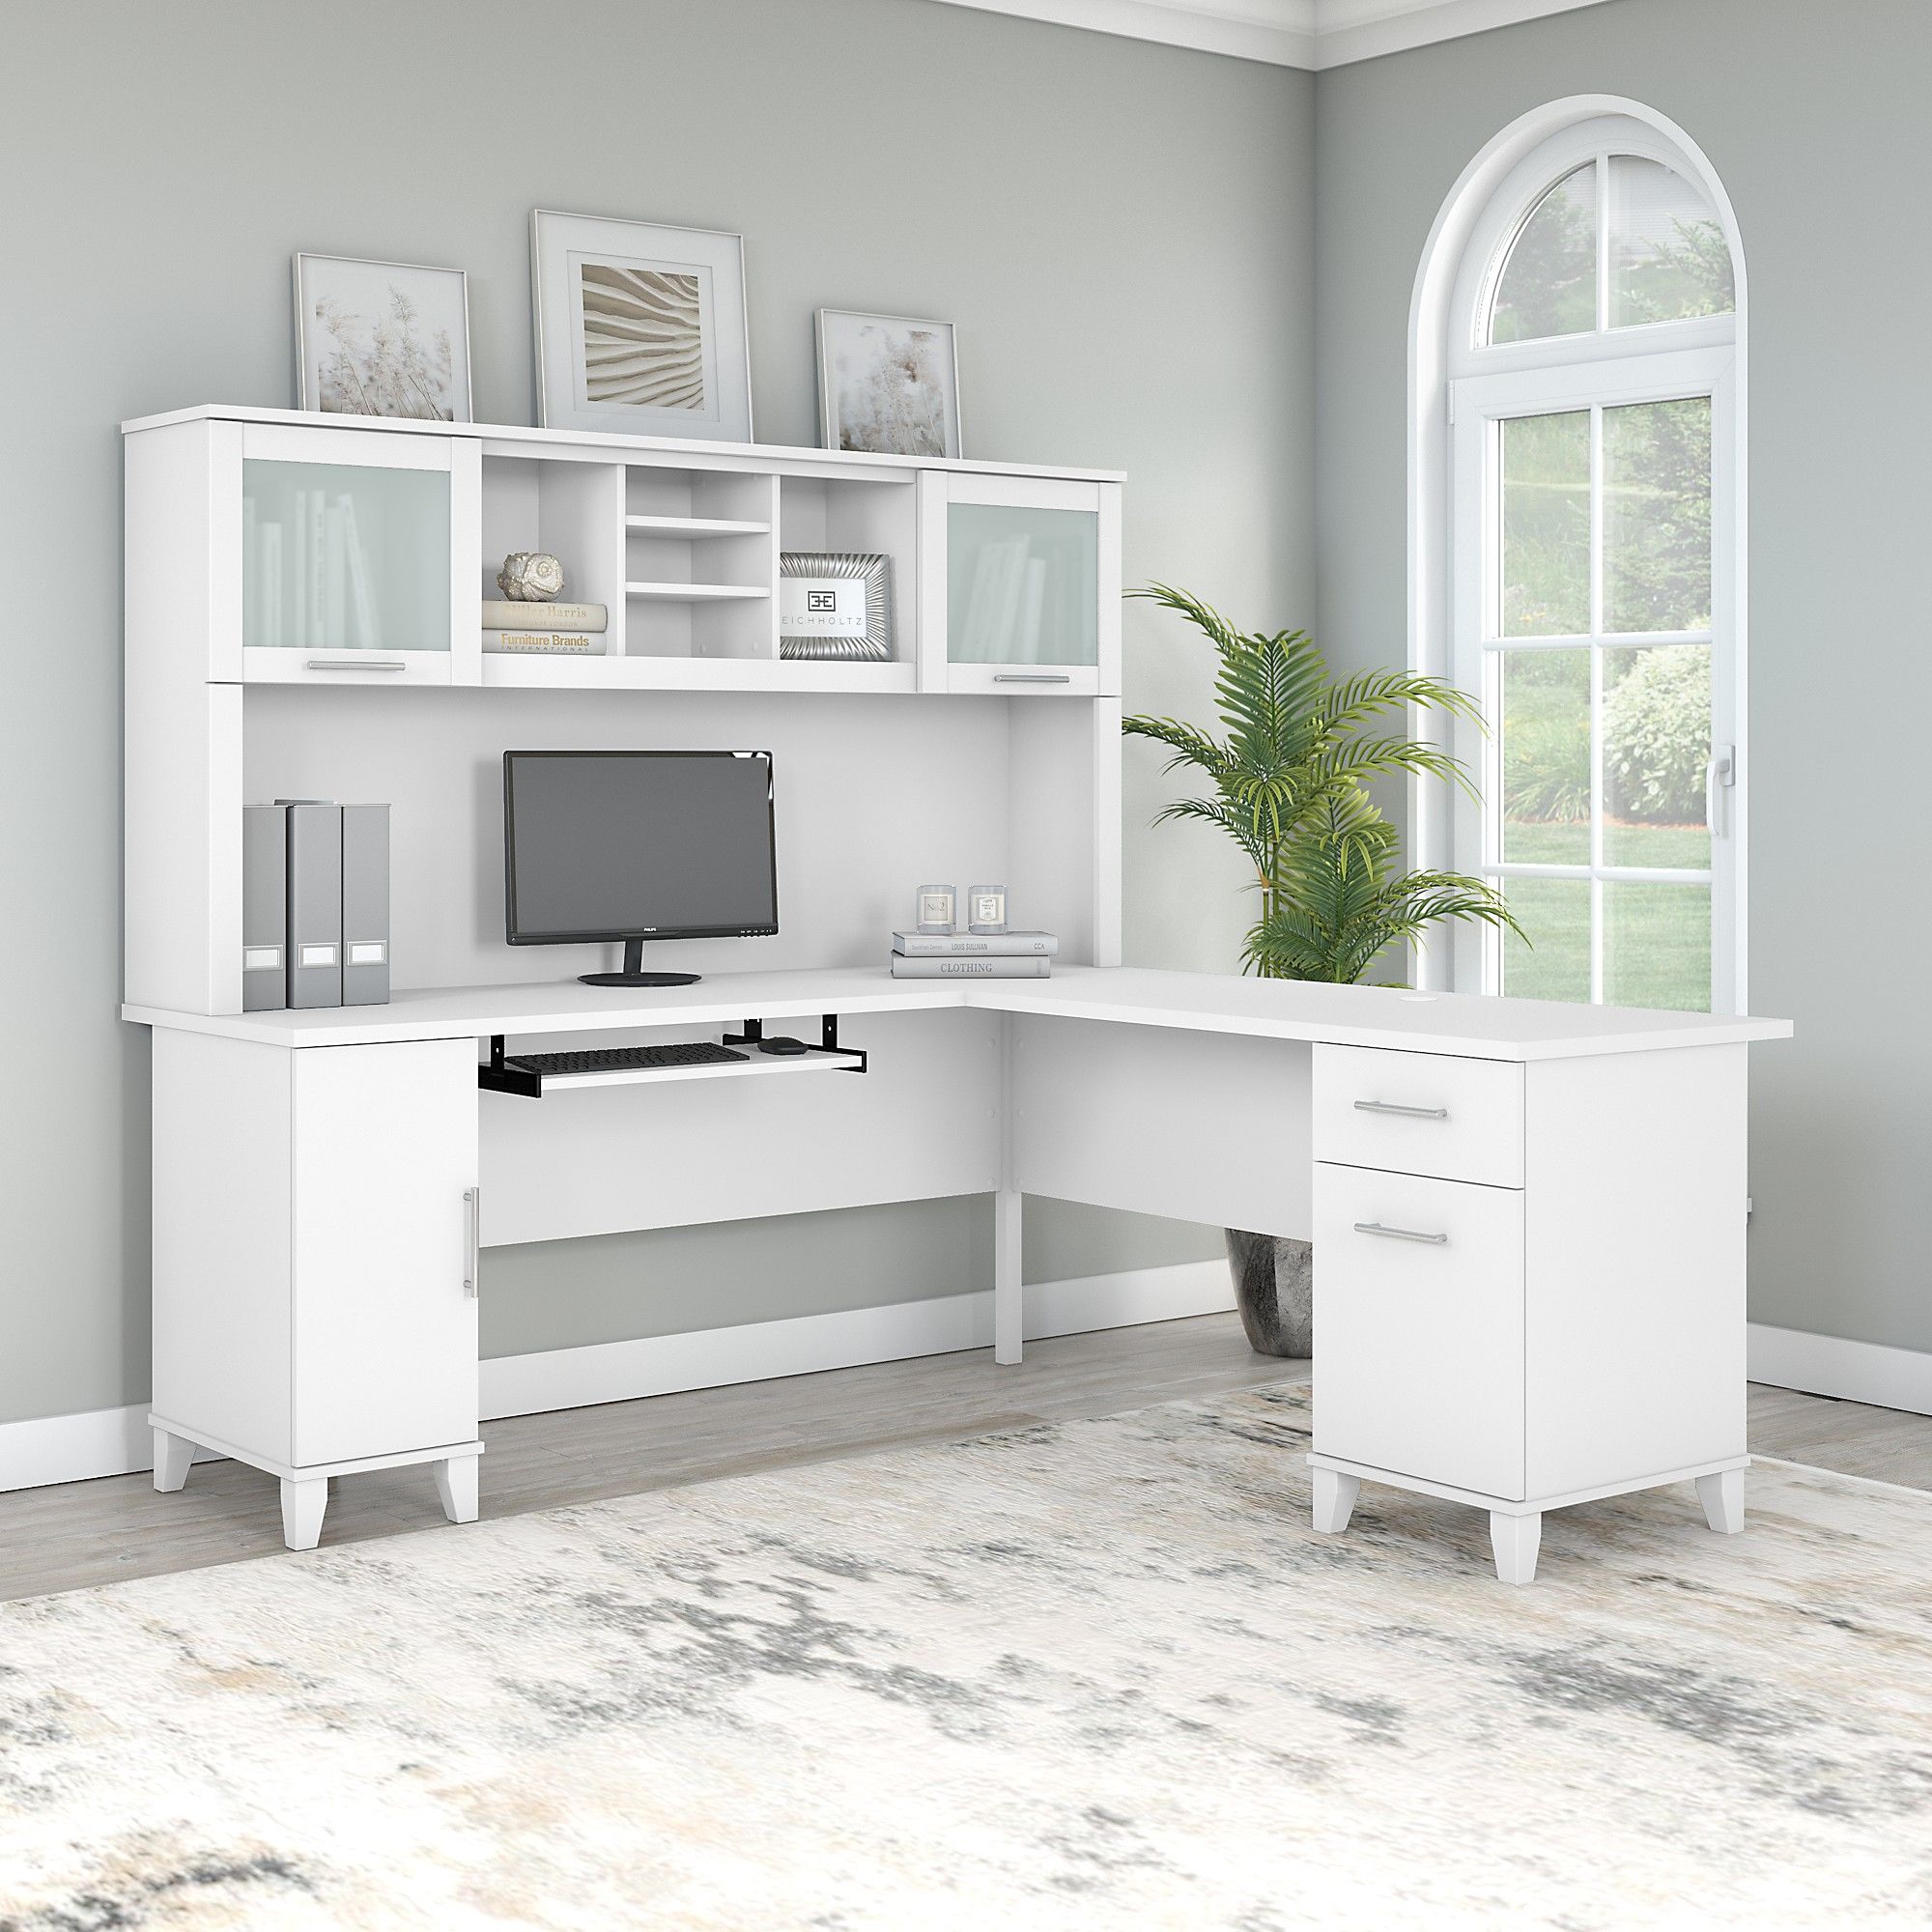 72w L Shaped Desk With Hutch In White, L Shaped Office Desk With Printer Storage